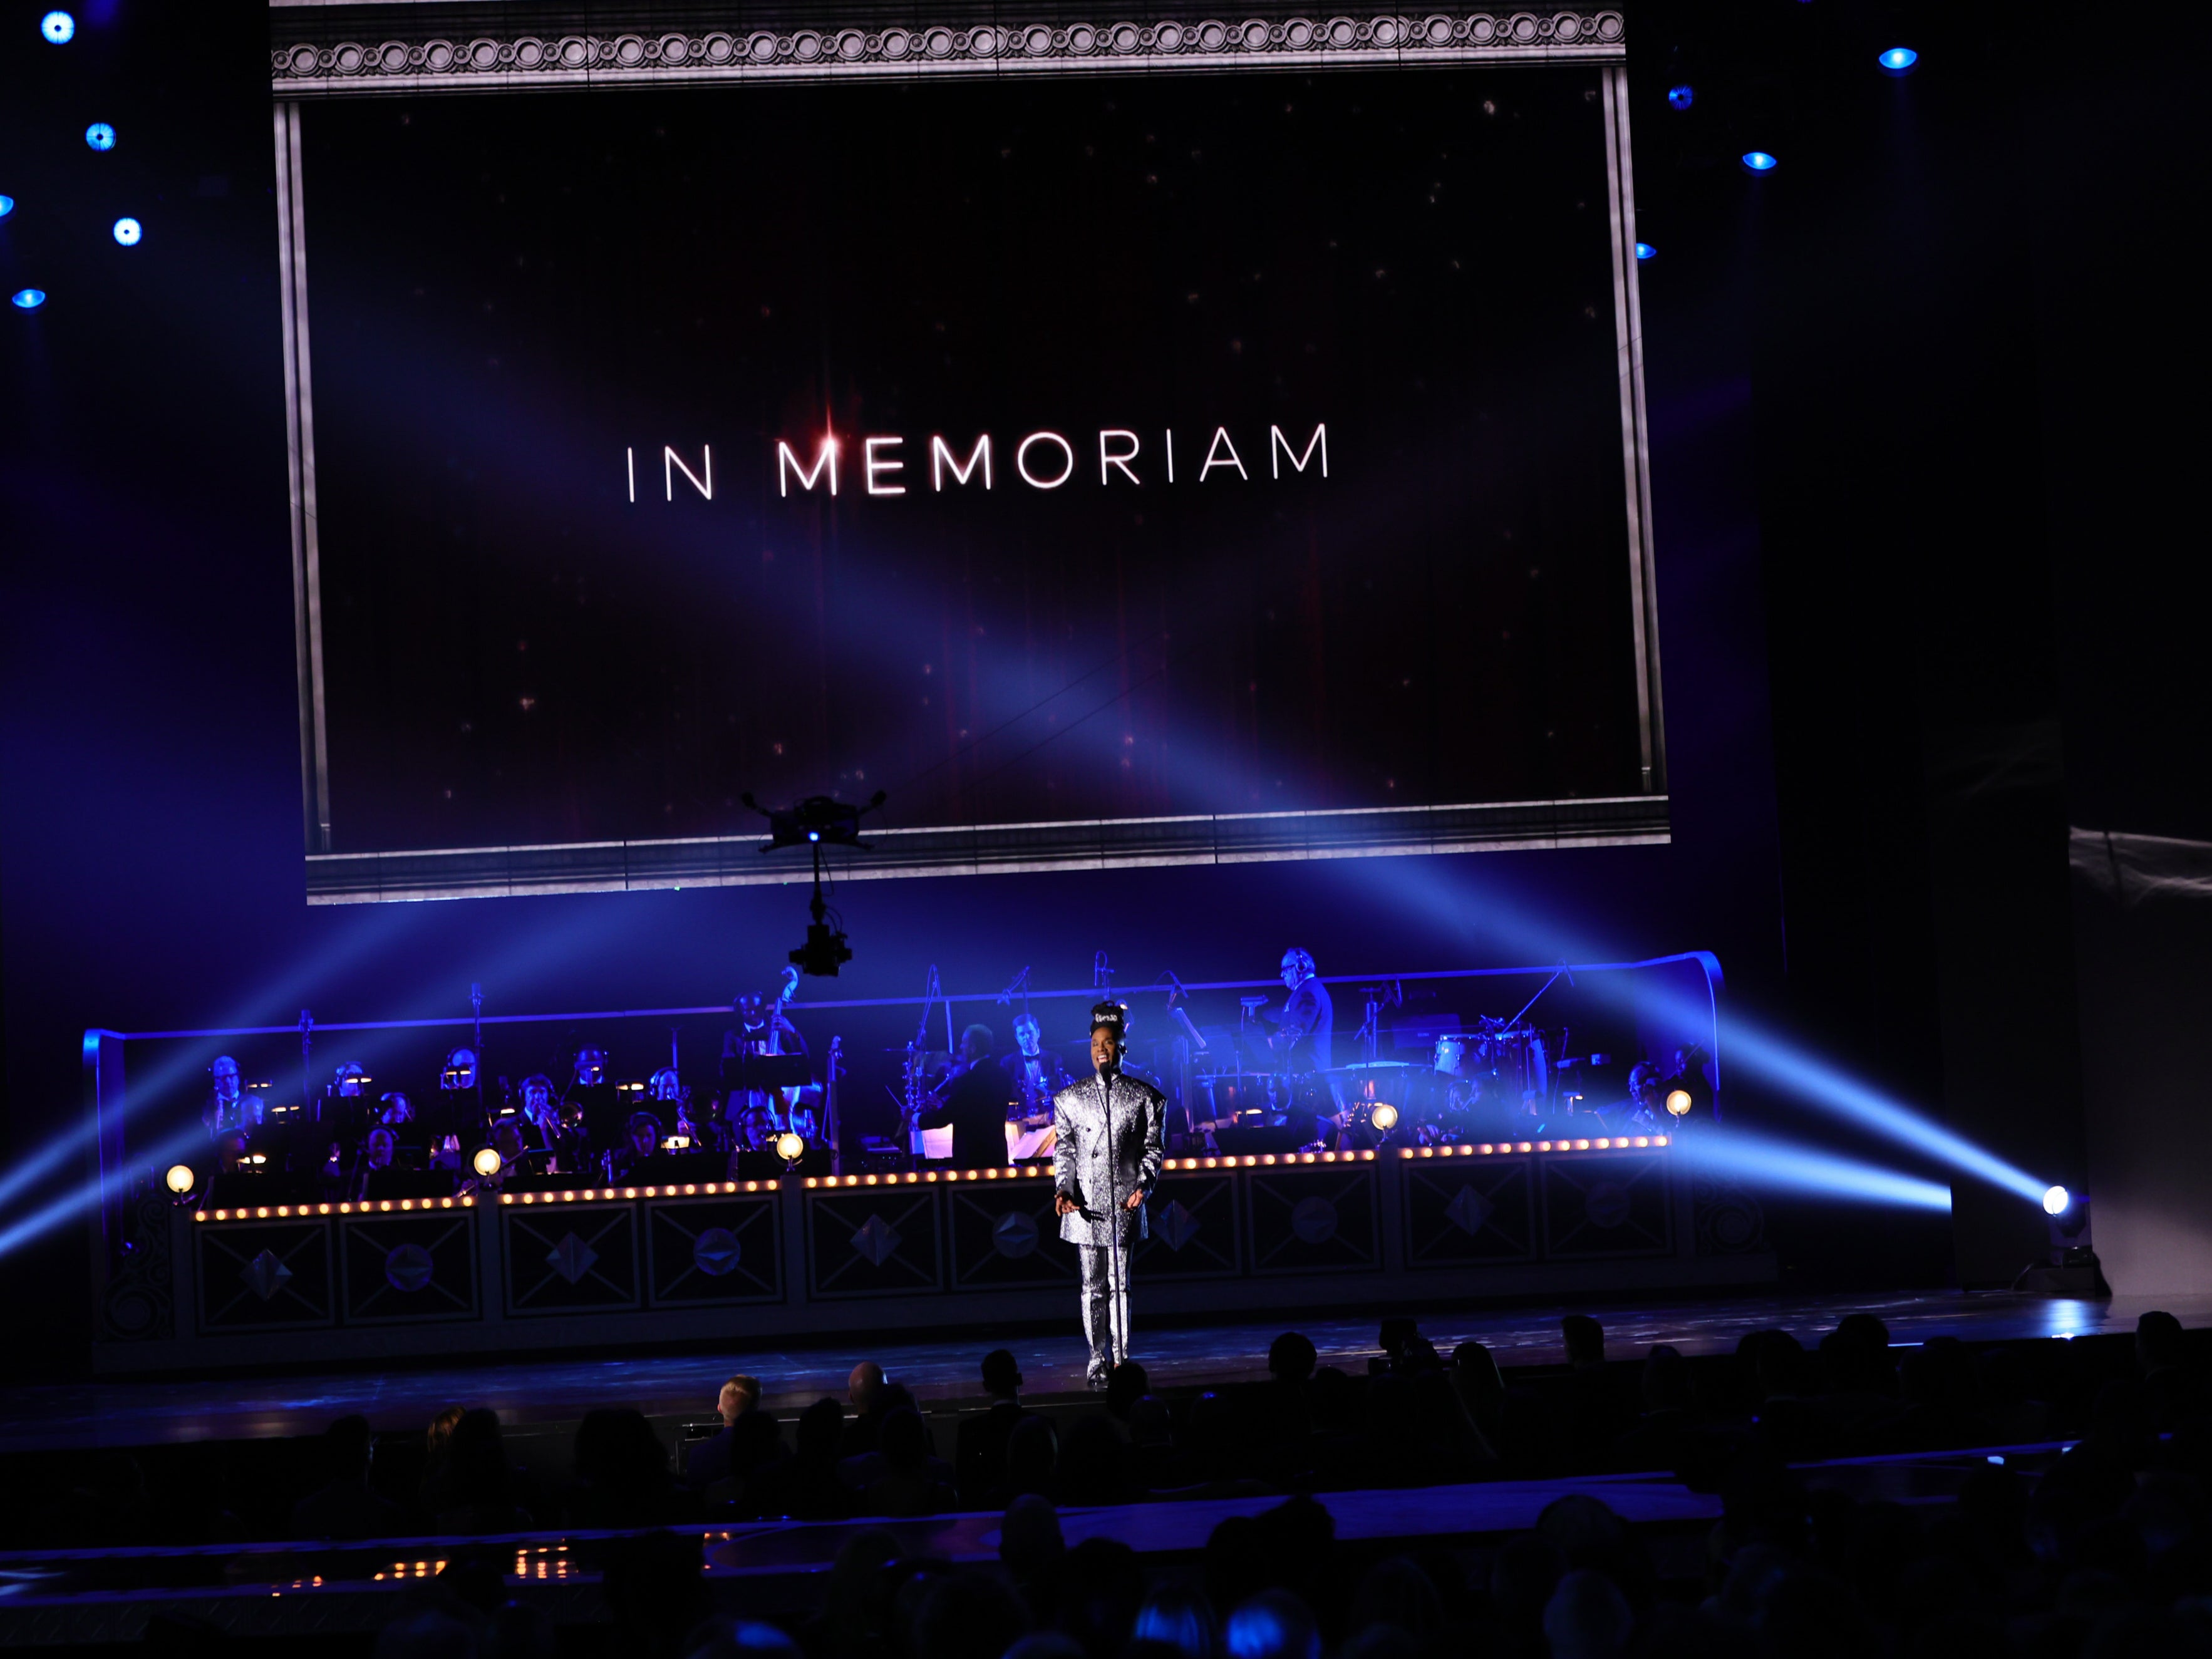 Billy Porter performs onstage during the In Memoriam segment of the 75th Annual Tony Awards at Radio City Music Hall on June 12, 2022 in New York City.